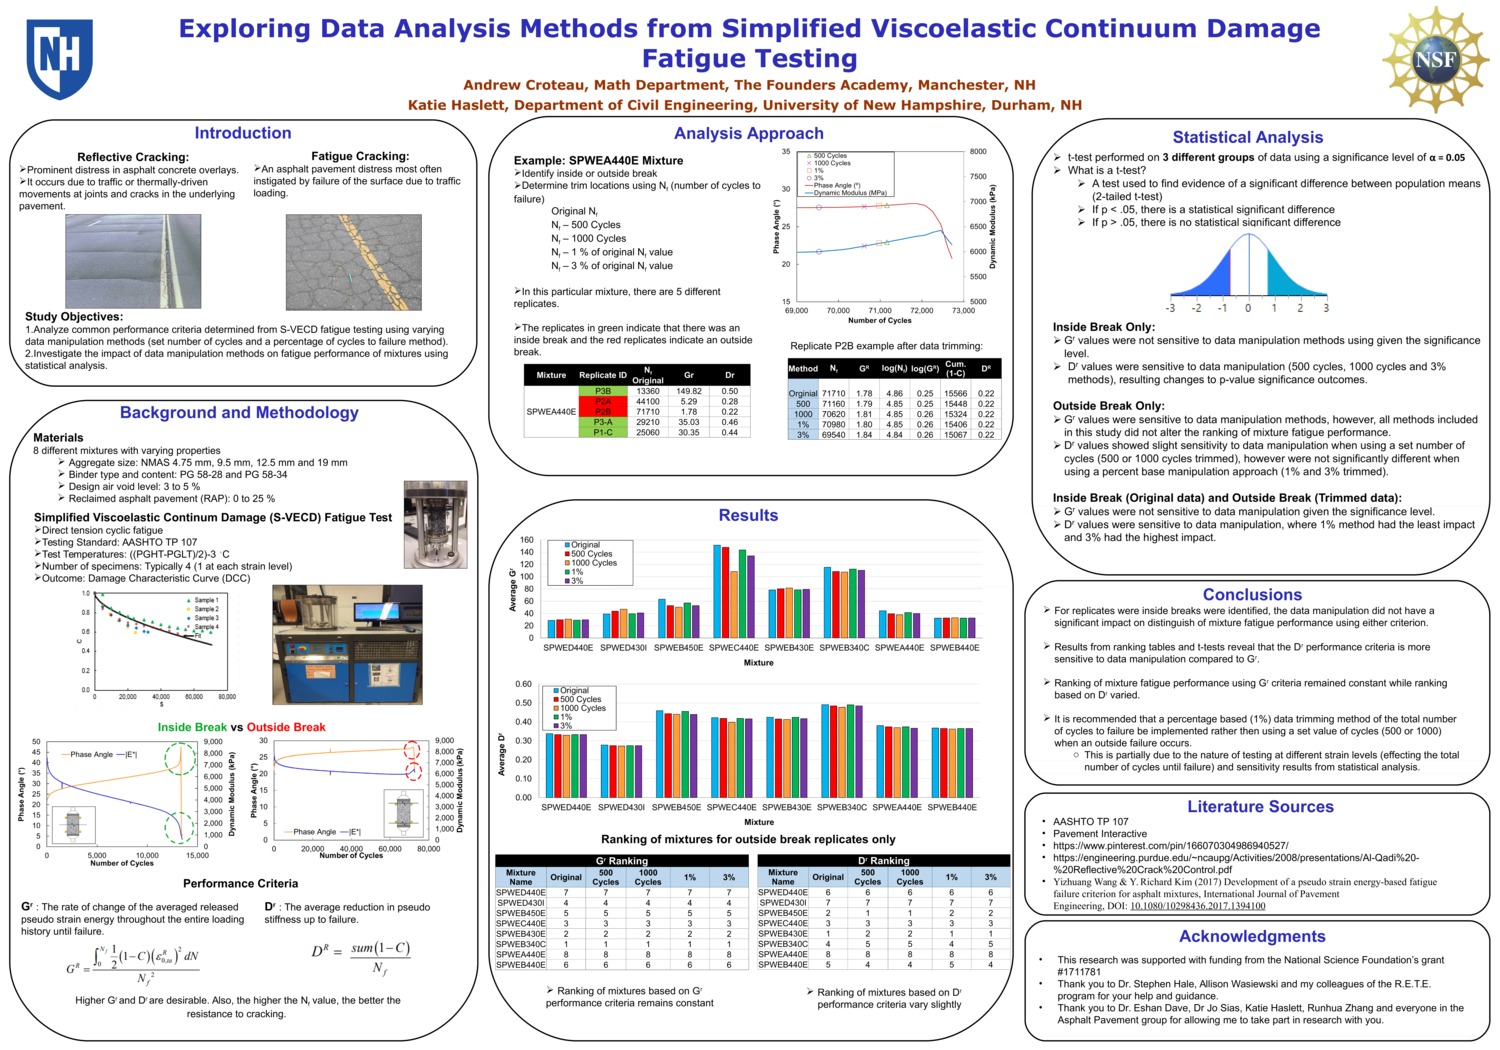 Exploring Data Analysis Methods From Simplified Viscoelastic Continuum Damage Fatigue Testing by atg28